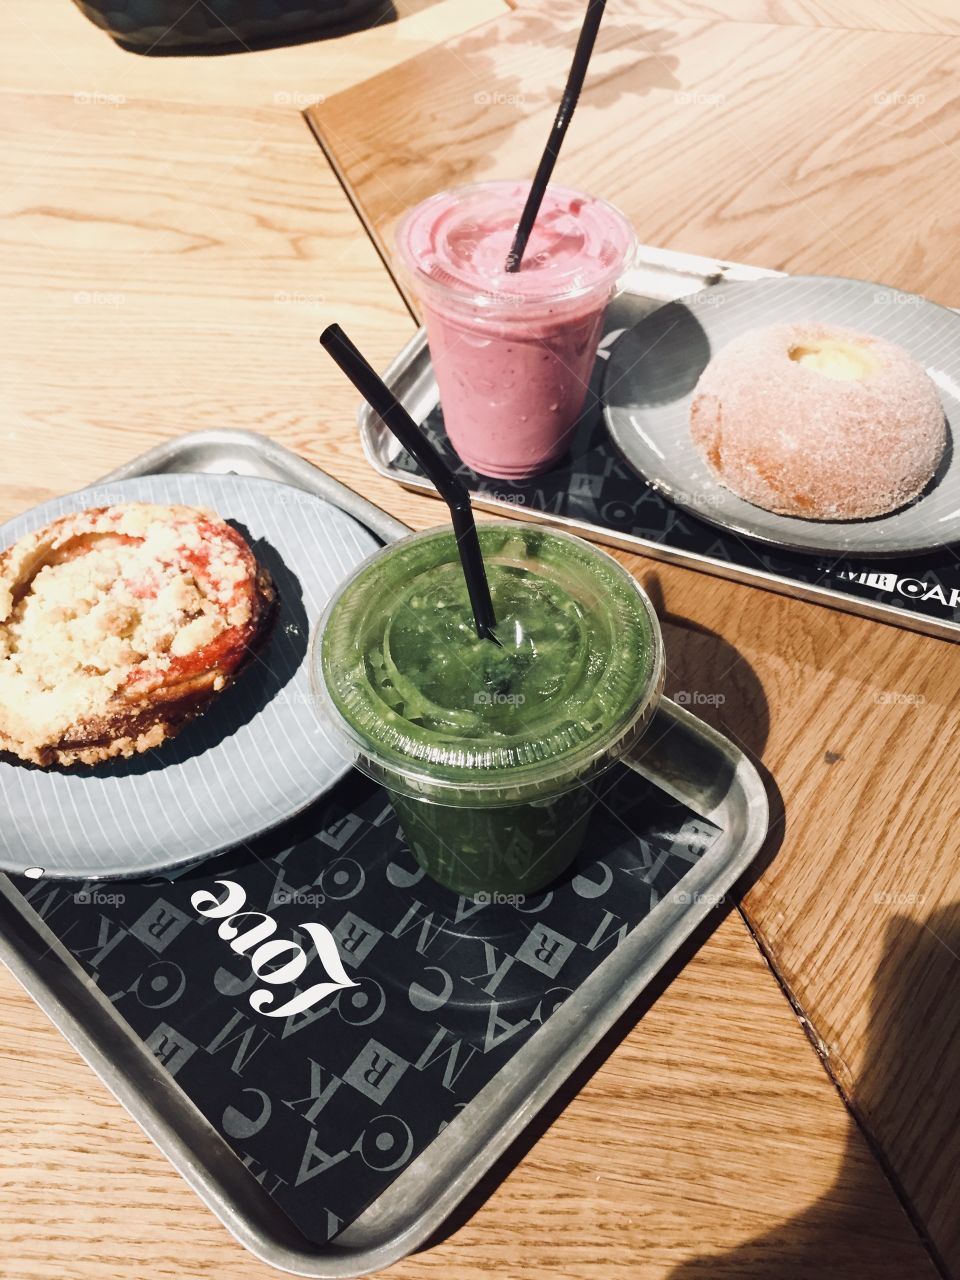 Colorful smoothies sit on trays next to freshly made pastries. A wooden table is beneath the two trays. 